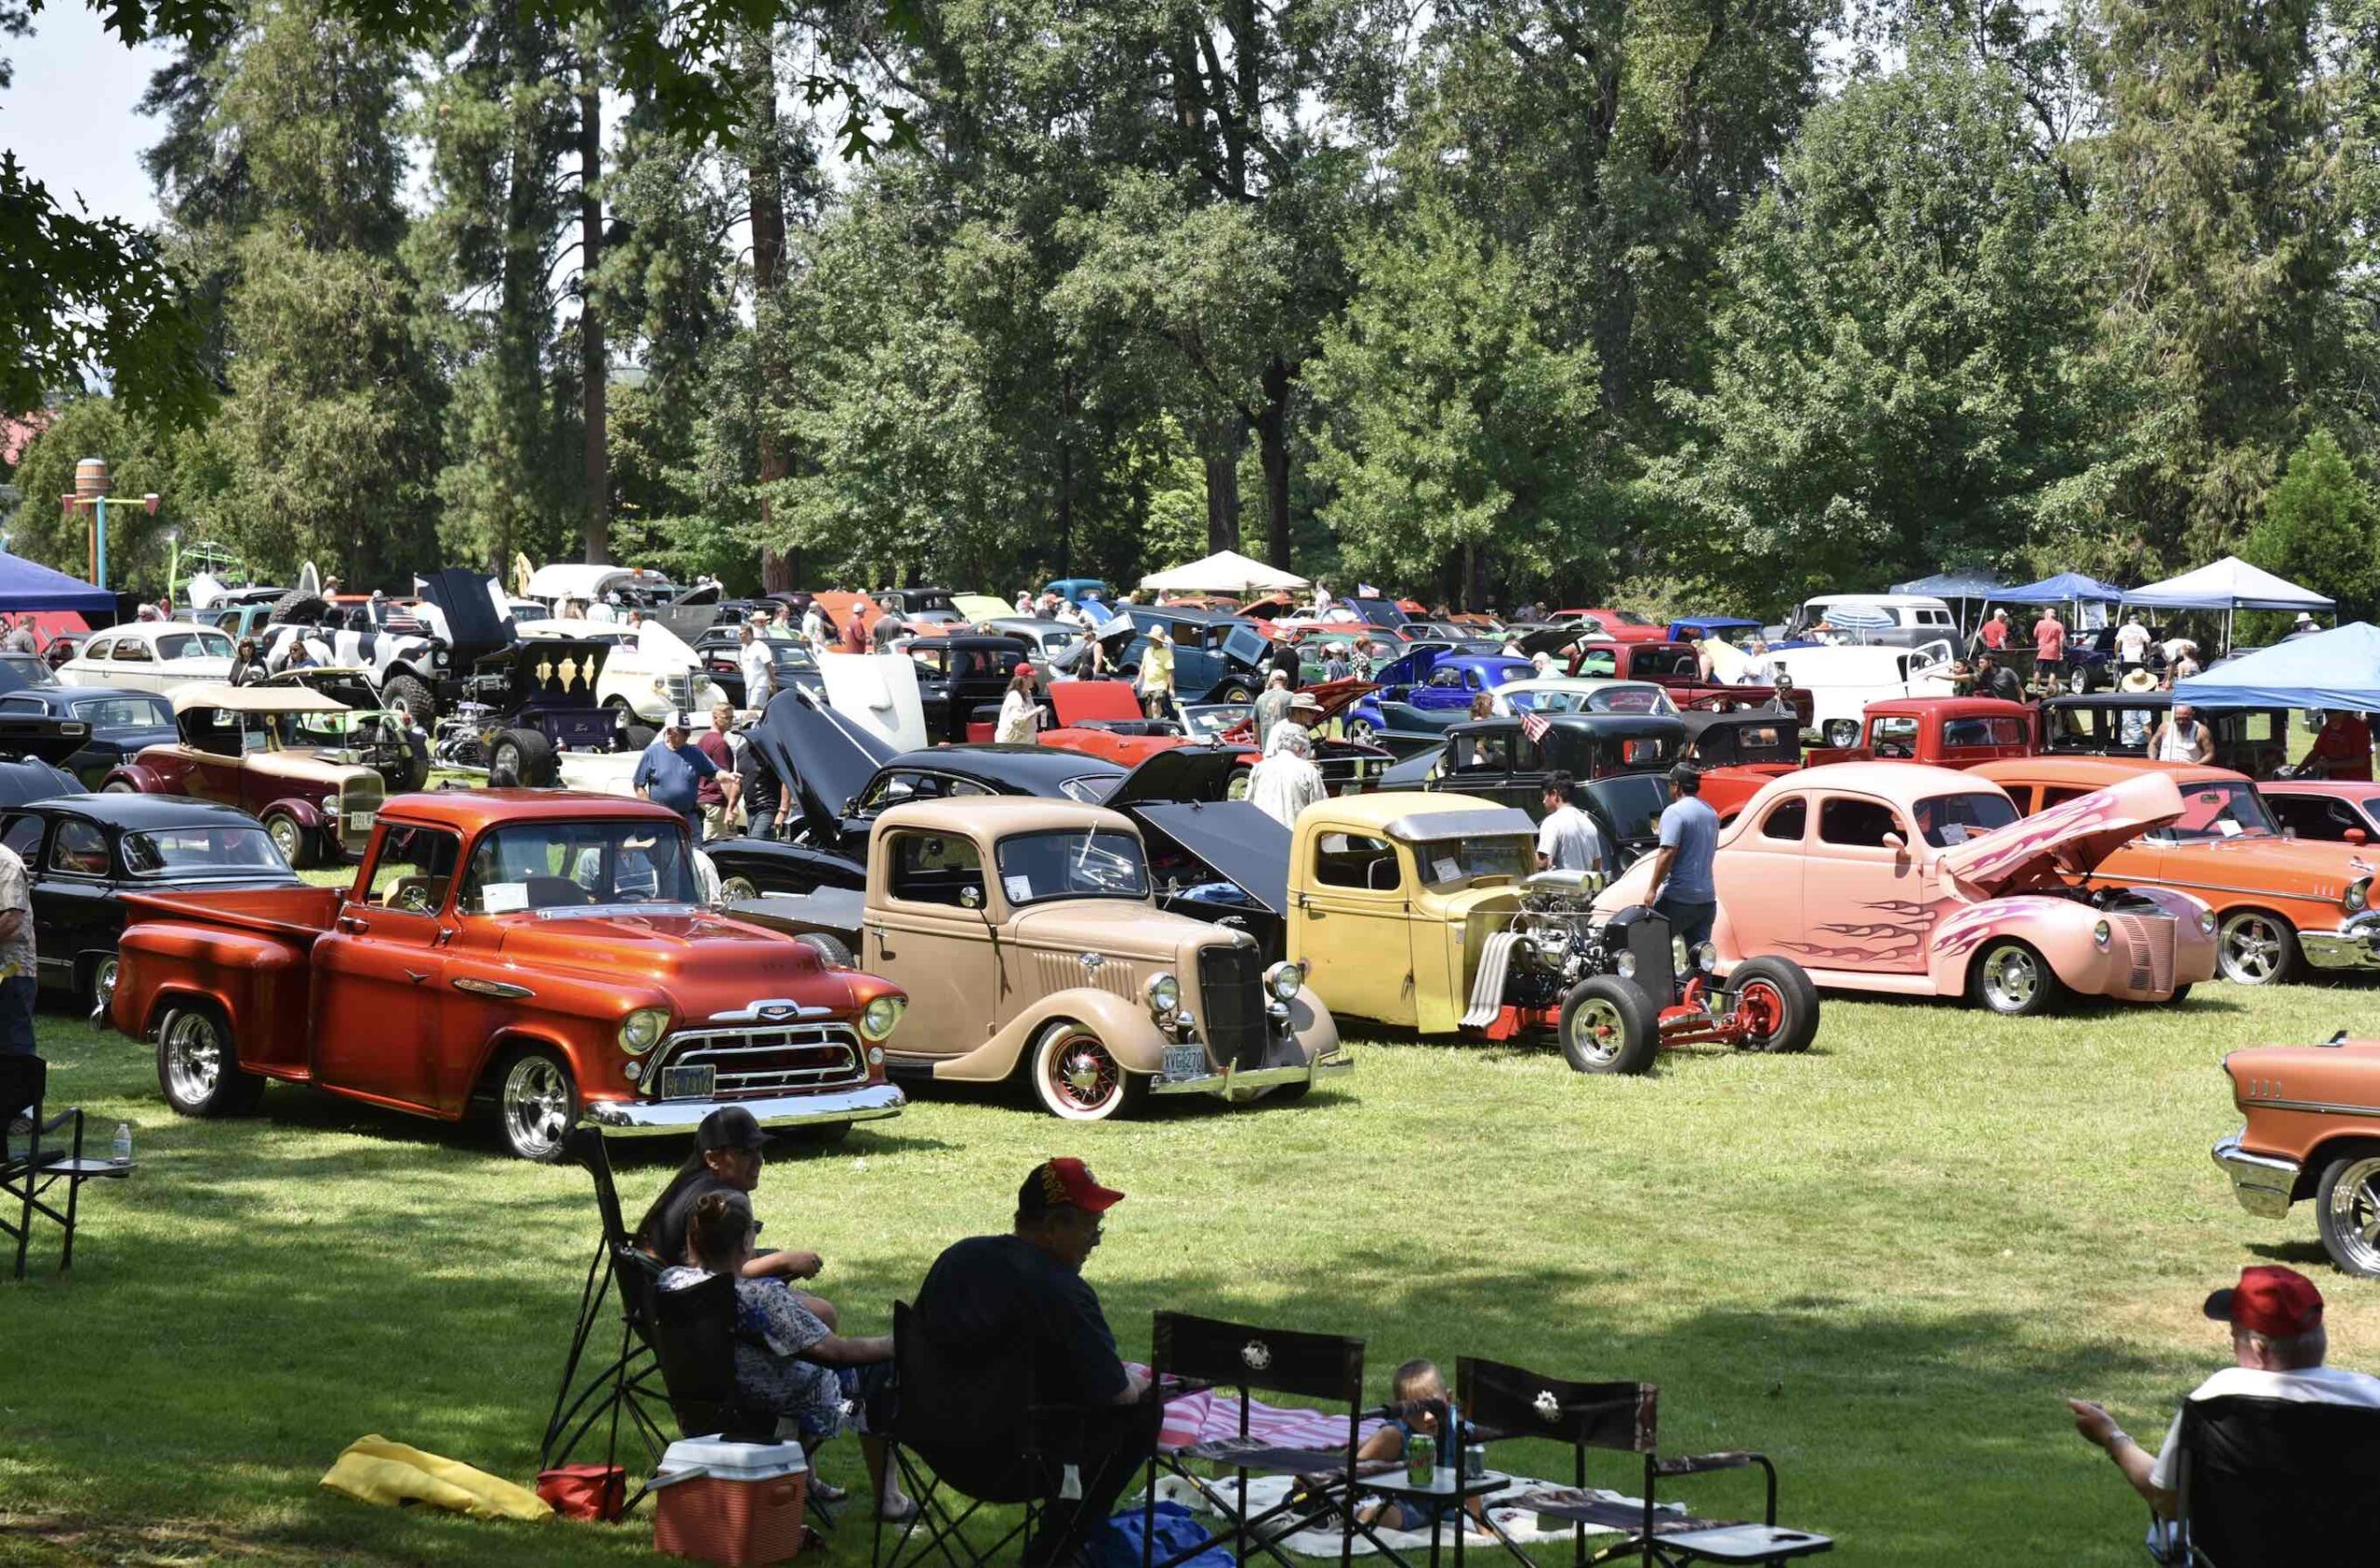 Back to the 50s car show, rows of colorful vintage cars in the park, hosted at the Josephine County Fairgrounds.